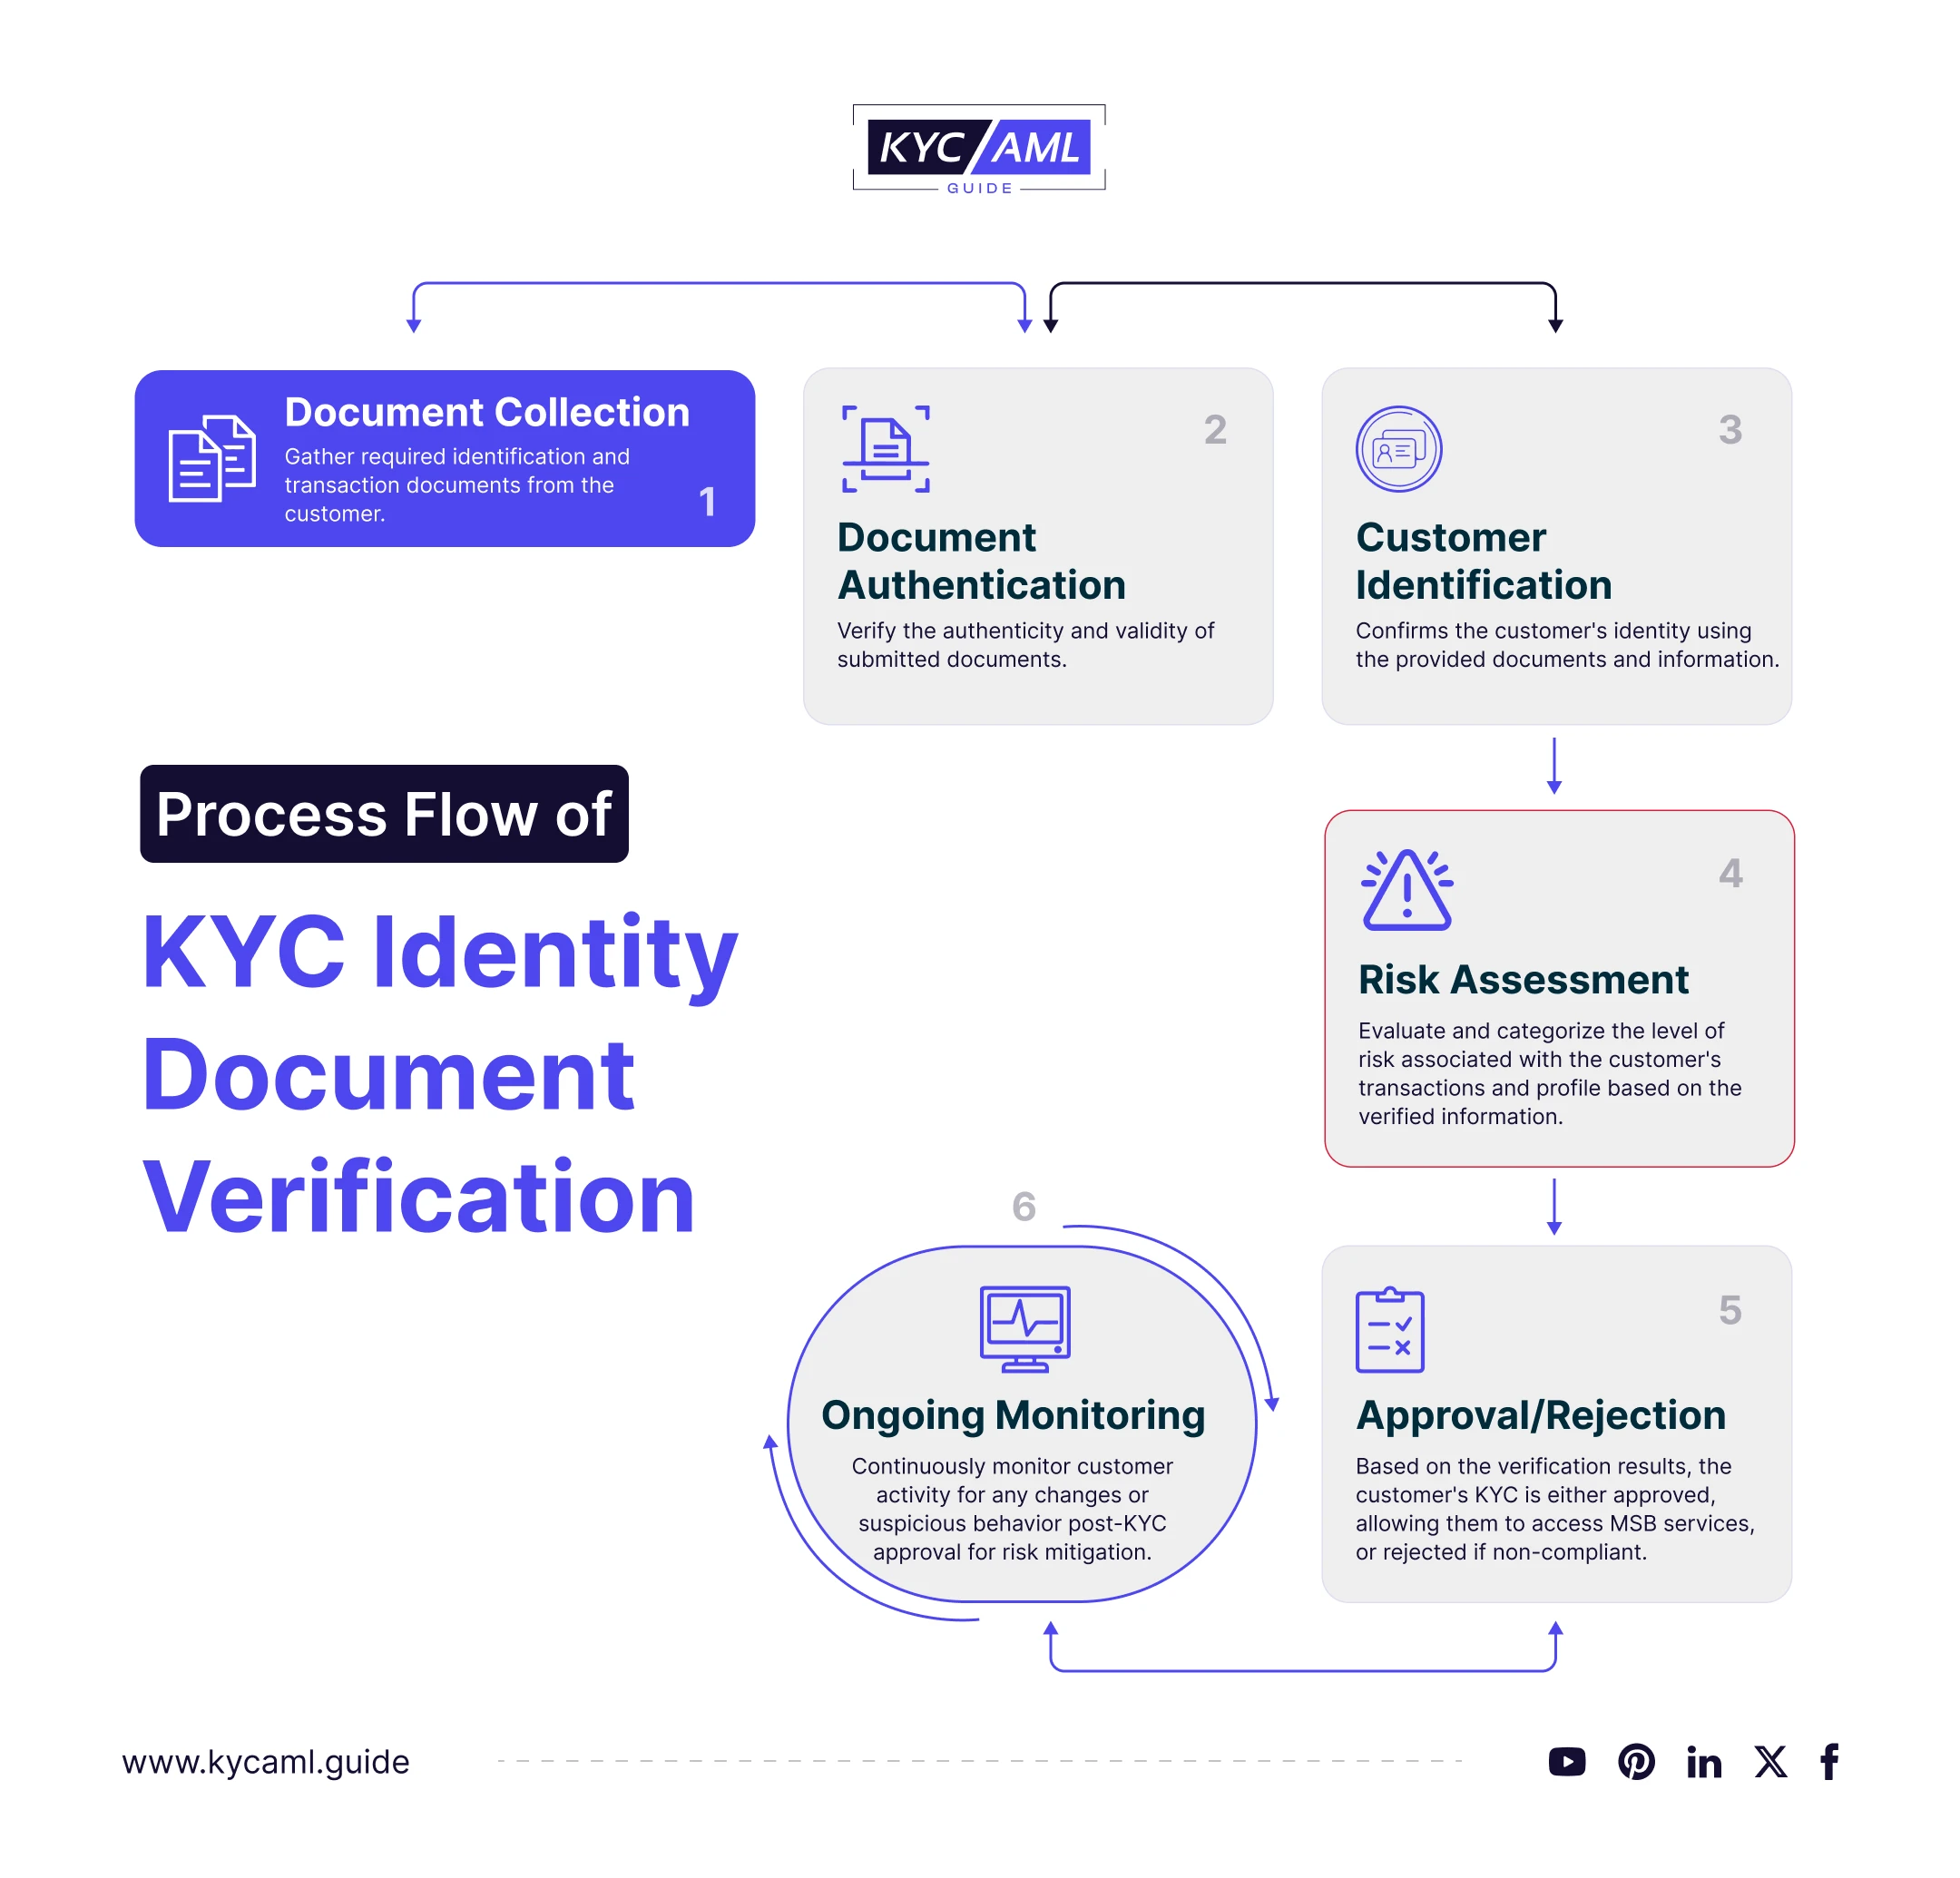 This flowchart explains the process of KYC document verification performed by a company. This includes document collection, document authentication, risk assessment, and ongoing monitoring.